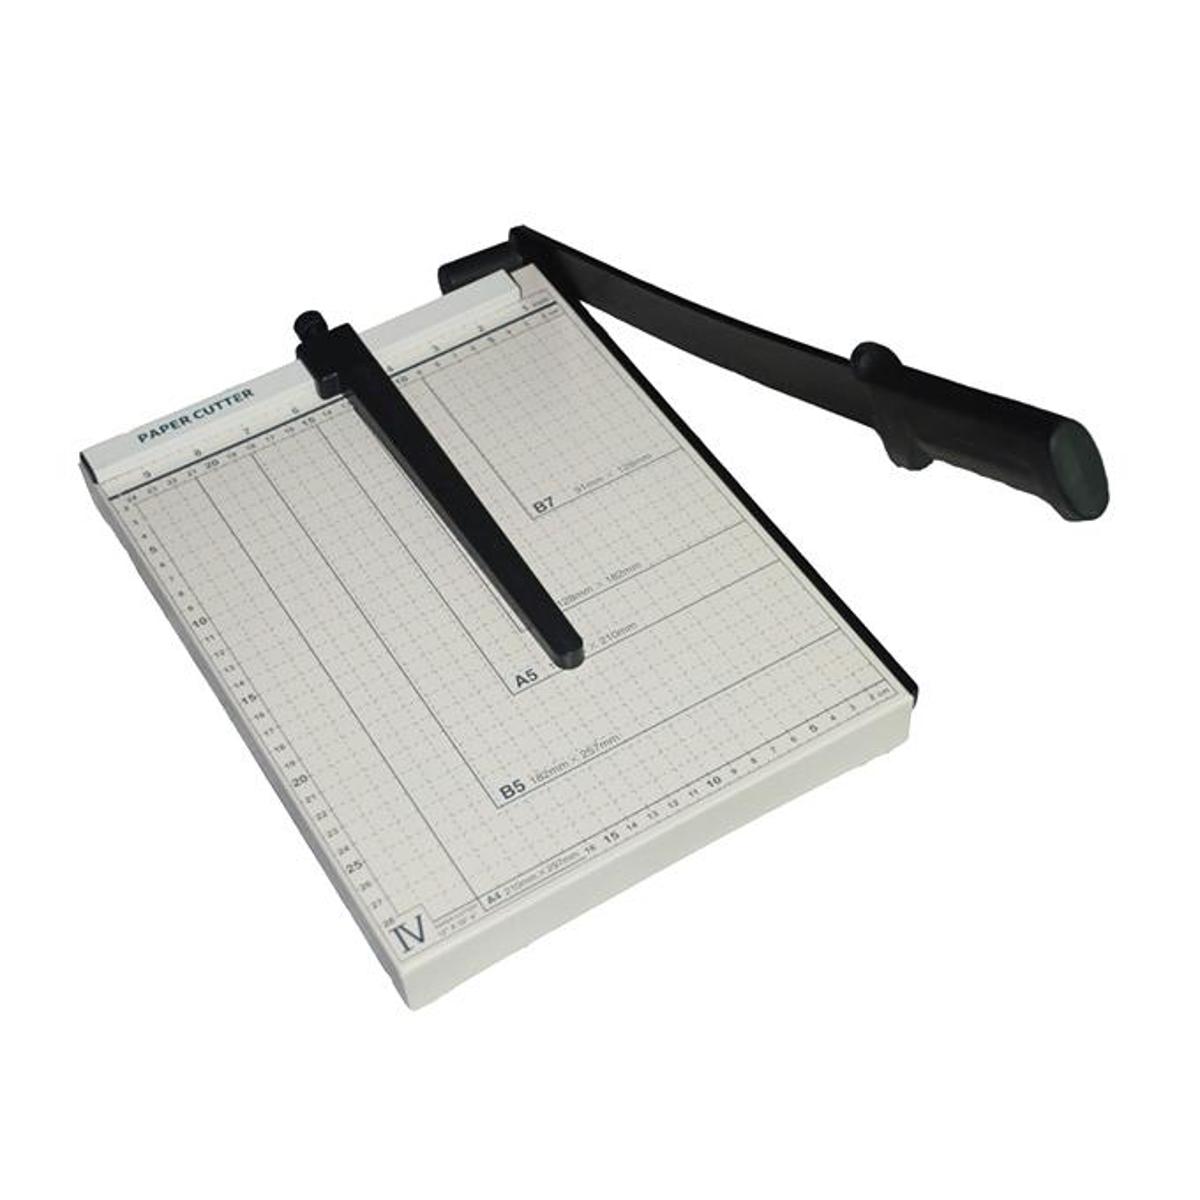 A4 Size Paper Cutter with Steel Base - White